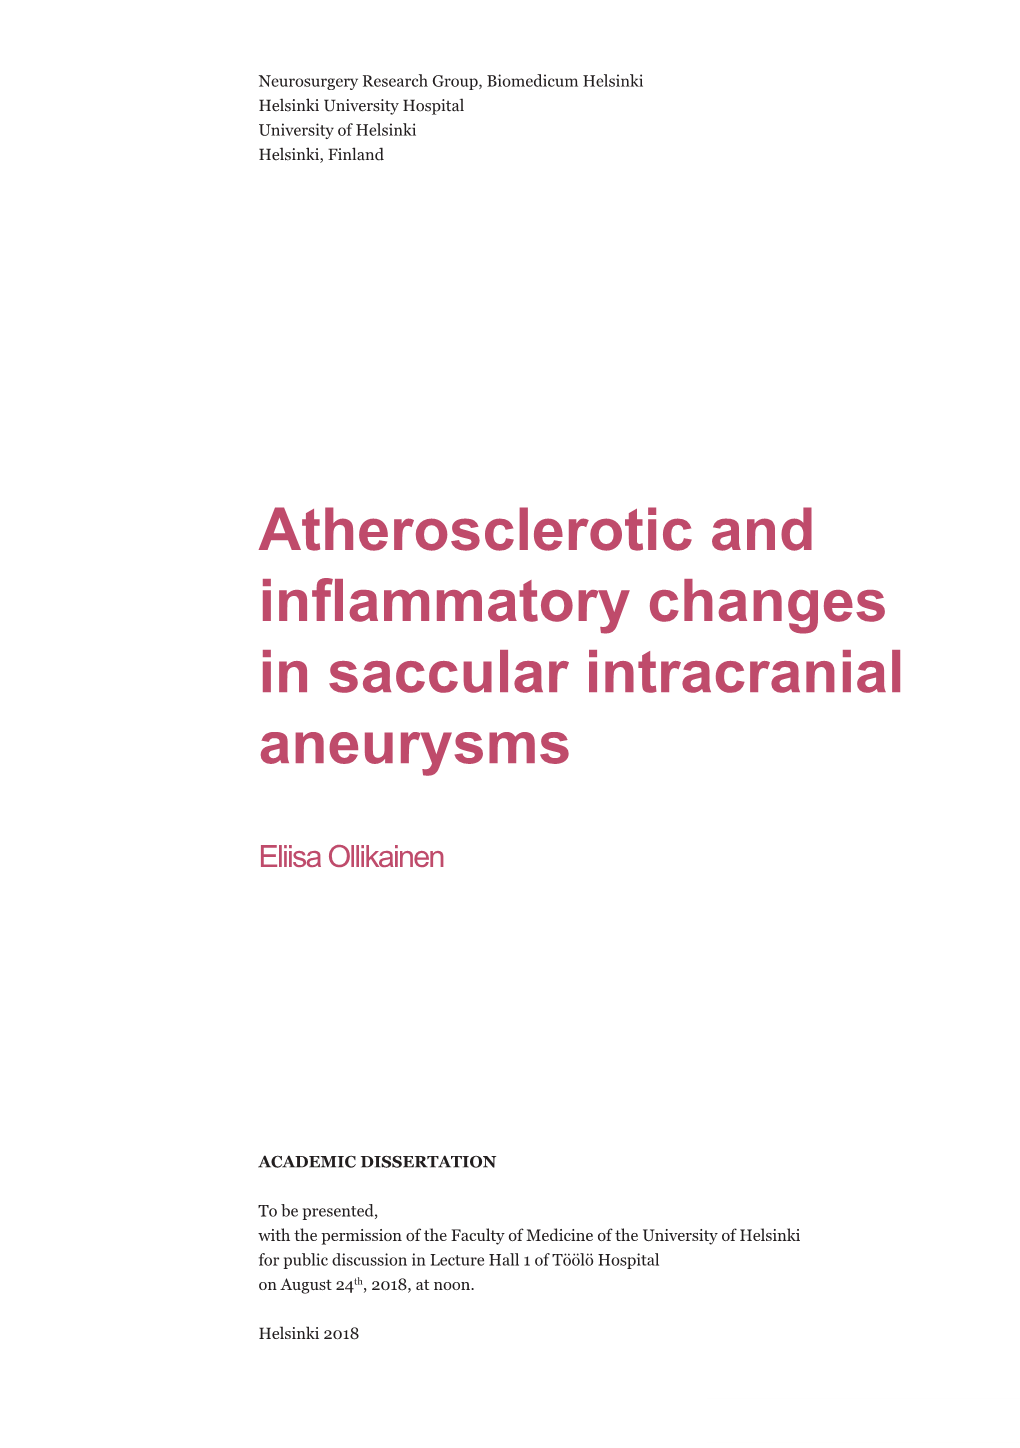 Atherosclerotic and Inflammatory Changes in Saccular Intracranial Aneurysms